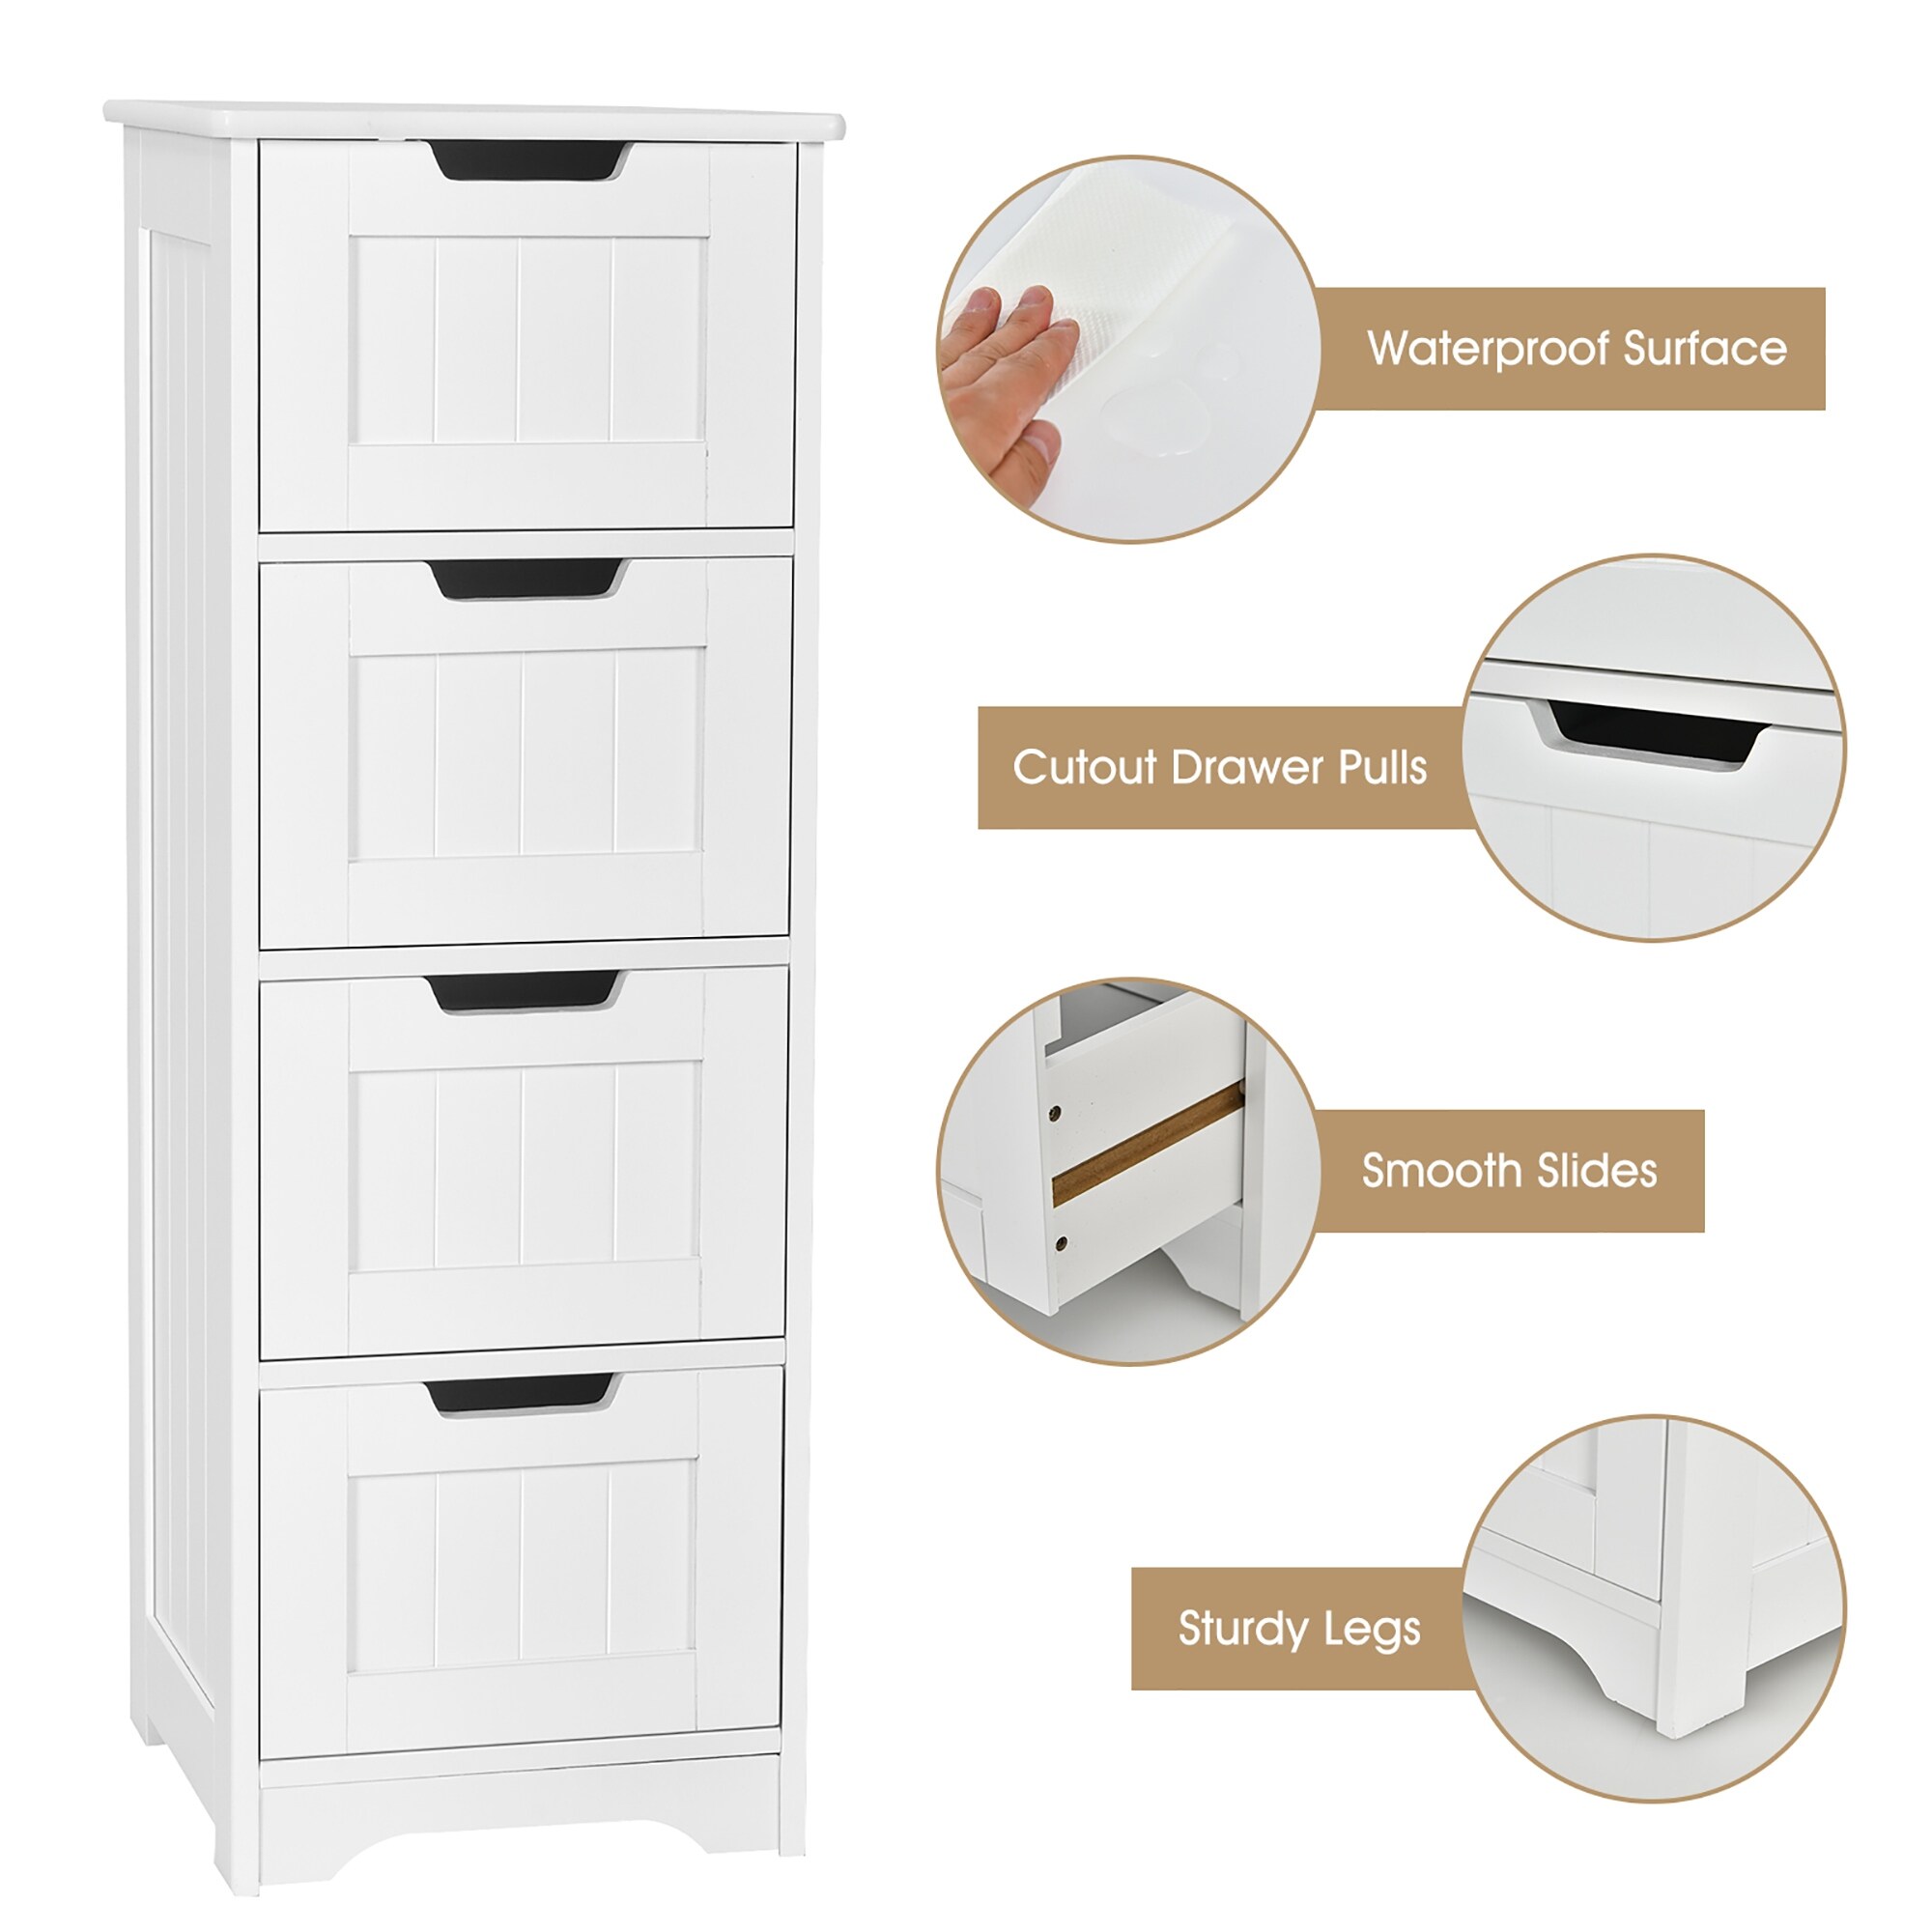 https://ak1.ostkcdn.com/images/products/is/images/direct/2e7720d648800ca161f31fdd9168d3d1ec150a16/Freestanding-Bathroom-Cabinet-Floor-Storage-Cabinet-with-4-Drawers.jpg